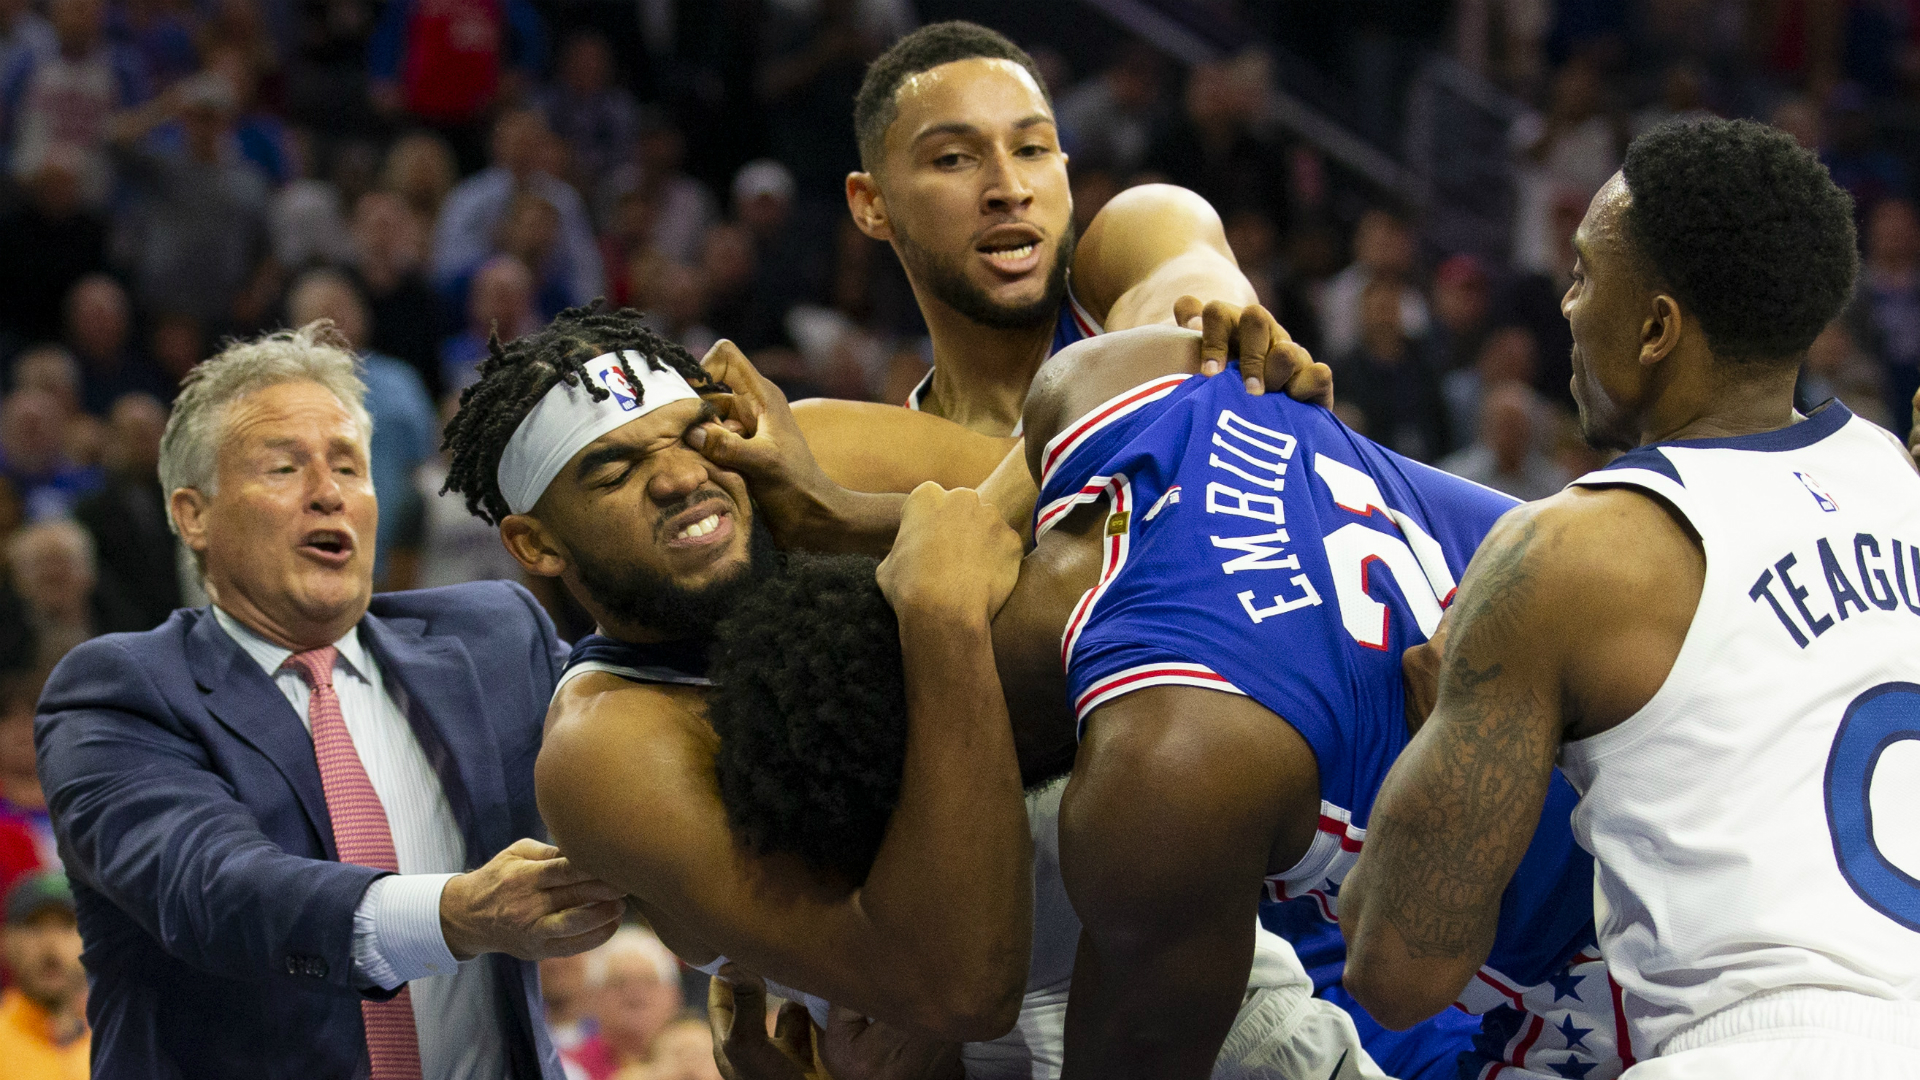 Flipboard: Ben Simmons rejects allegations he was aggressor in Embiid-Towns fight